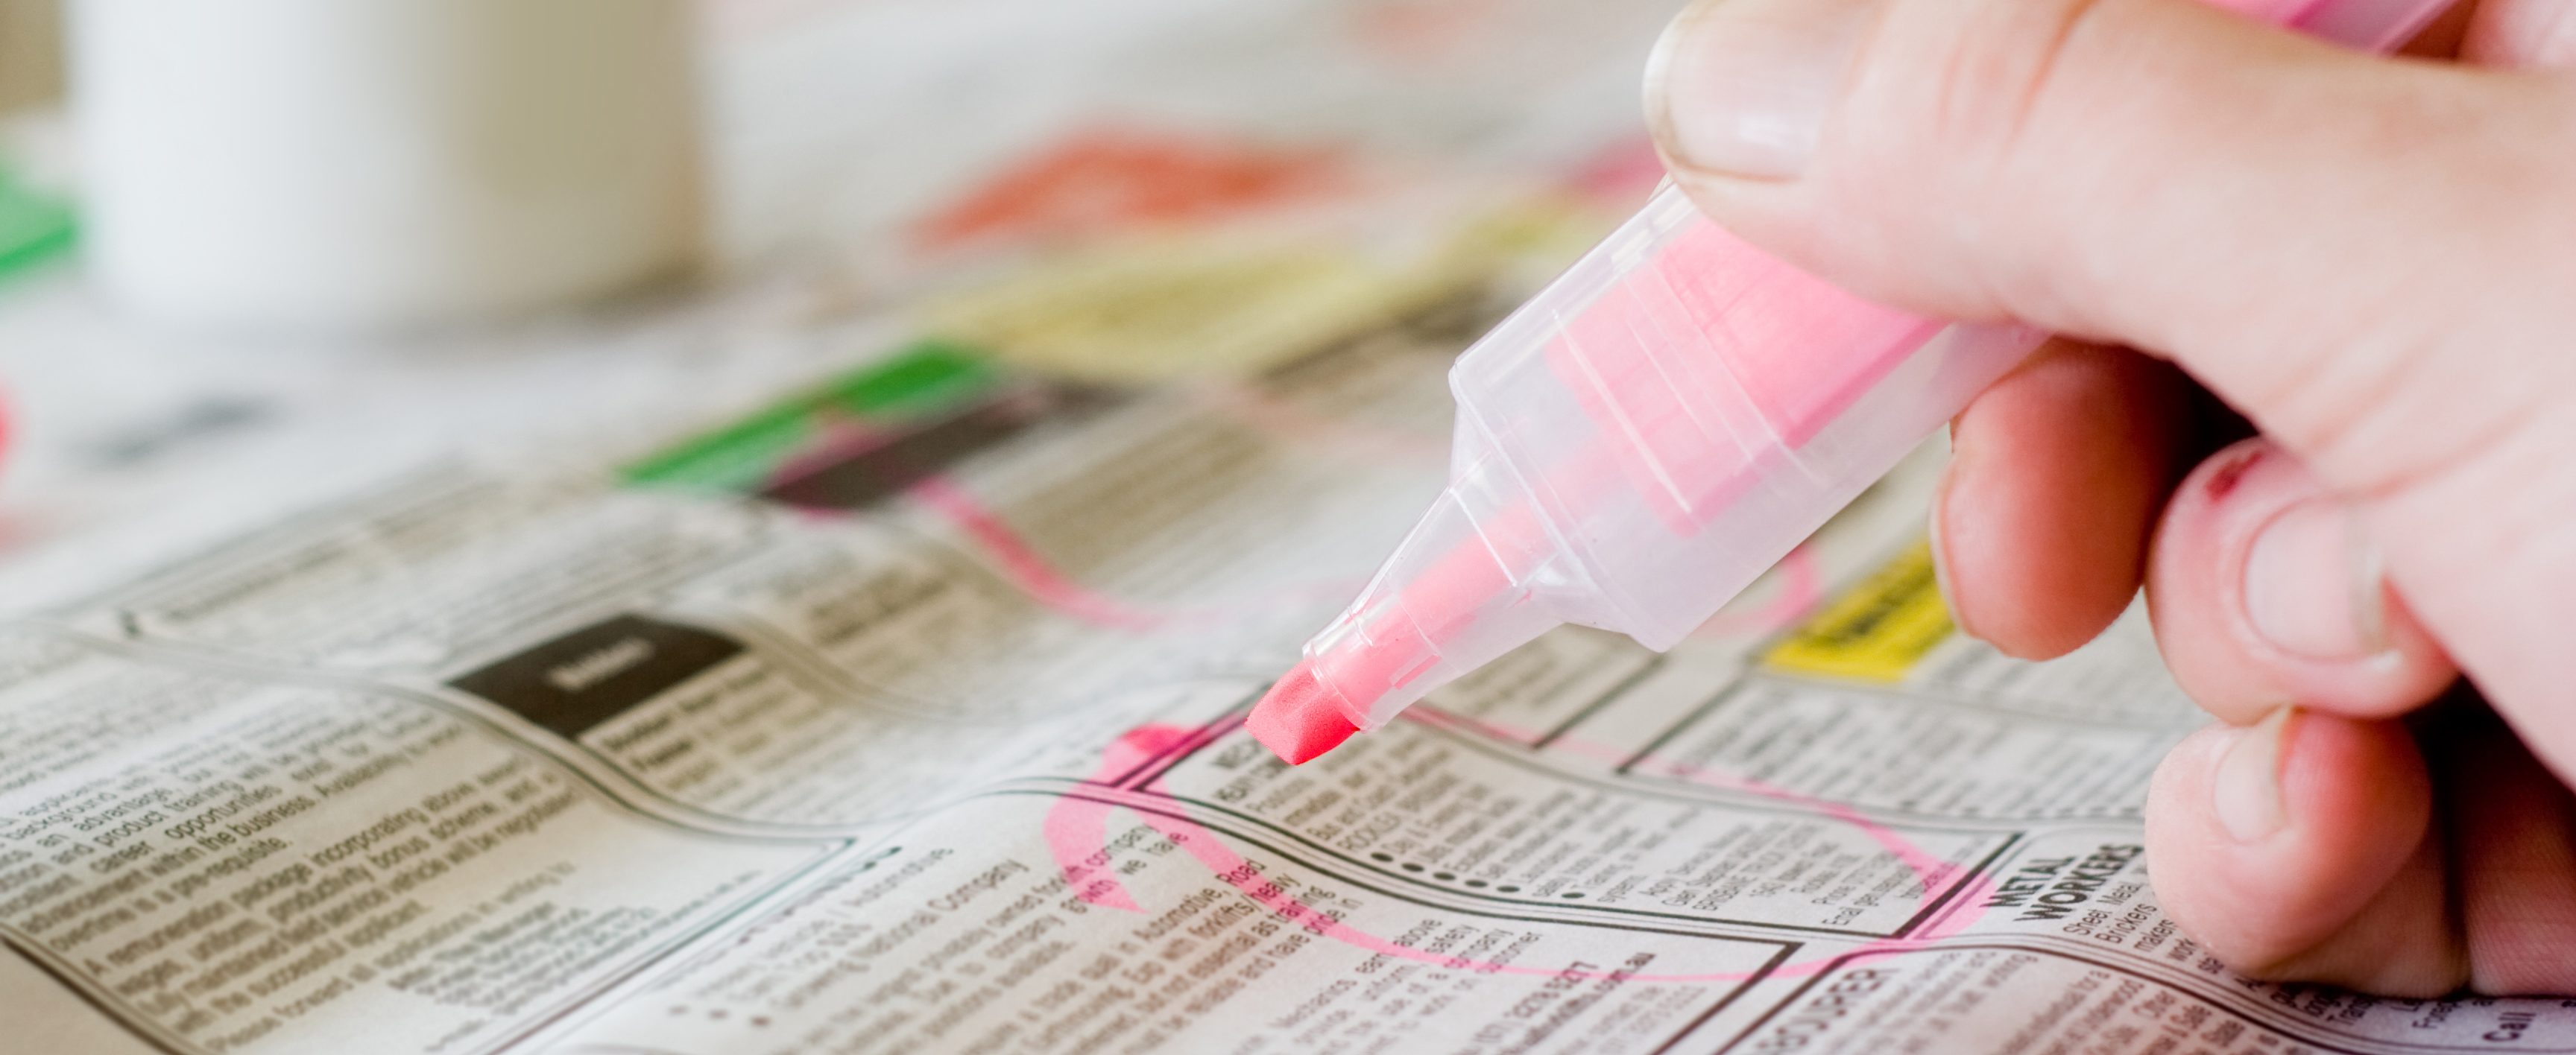 Close-up of someone circling items in a newspaper with a highlighter.